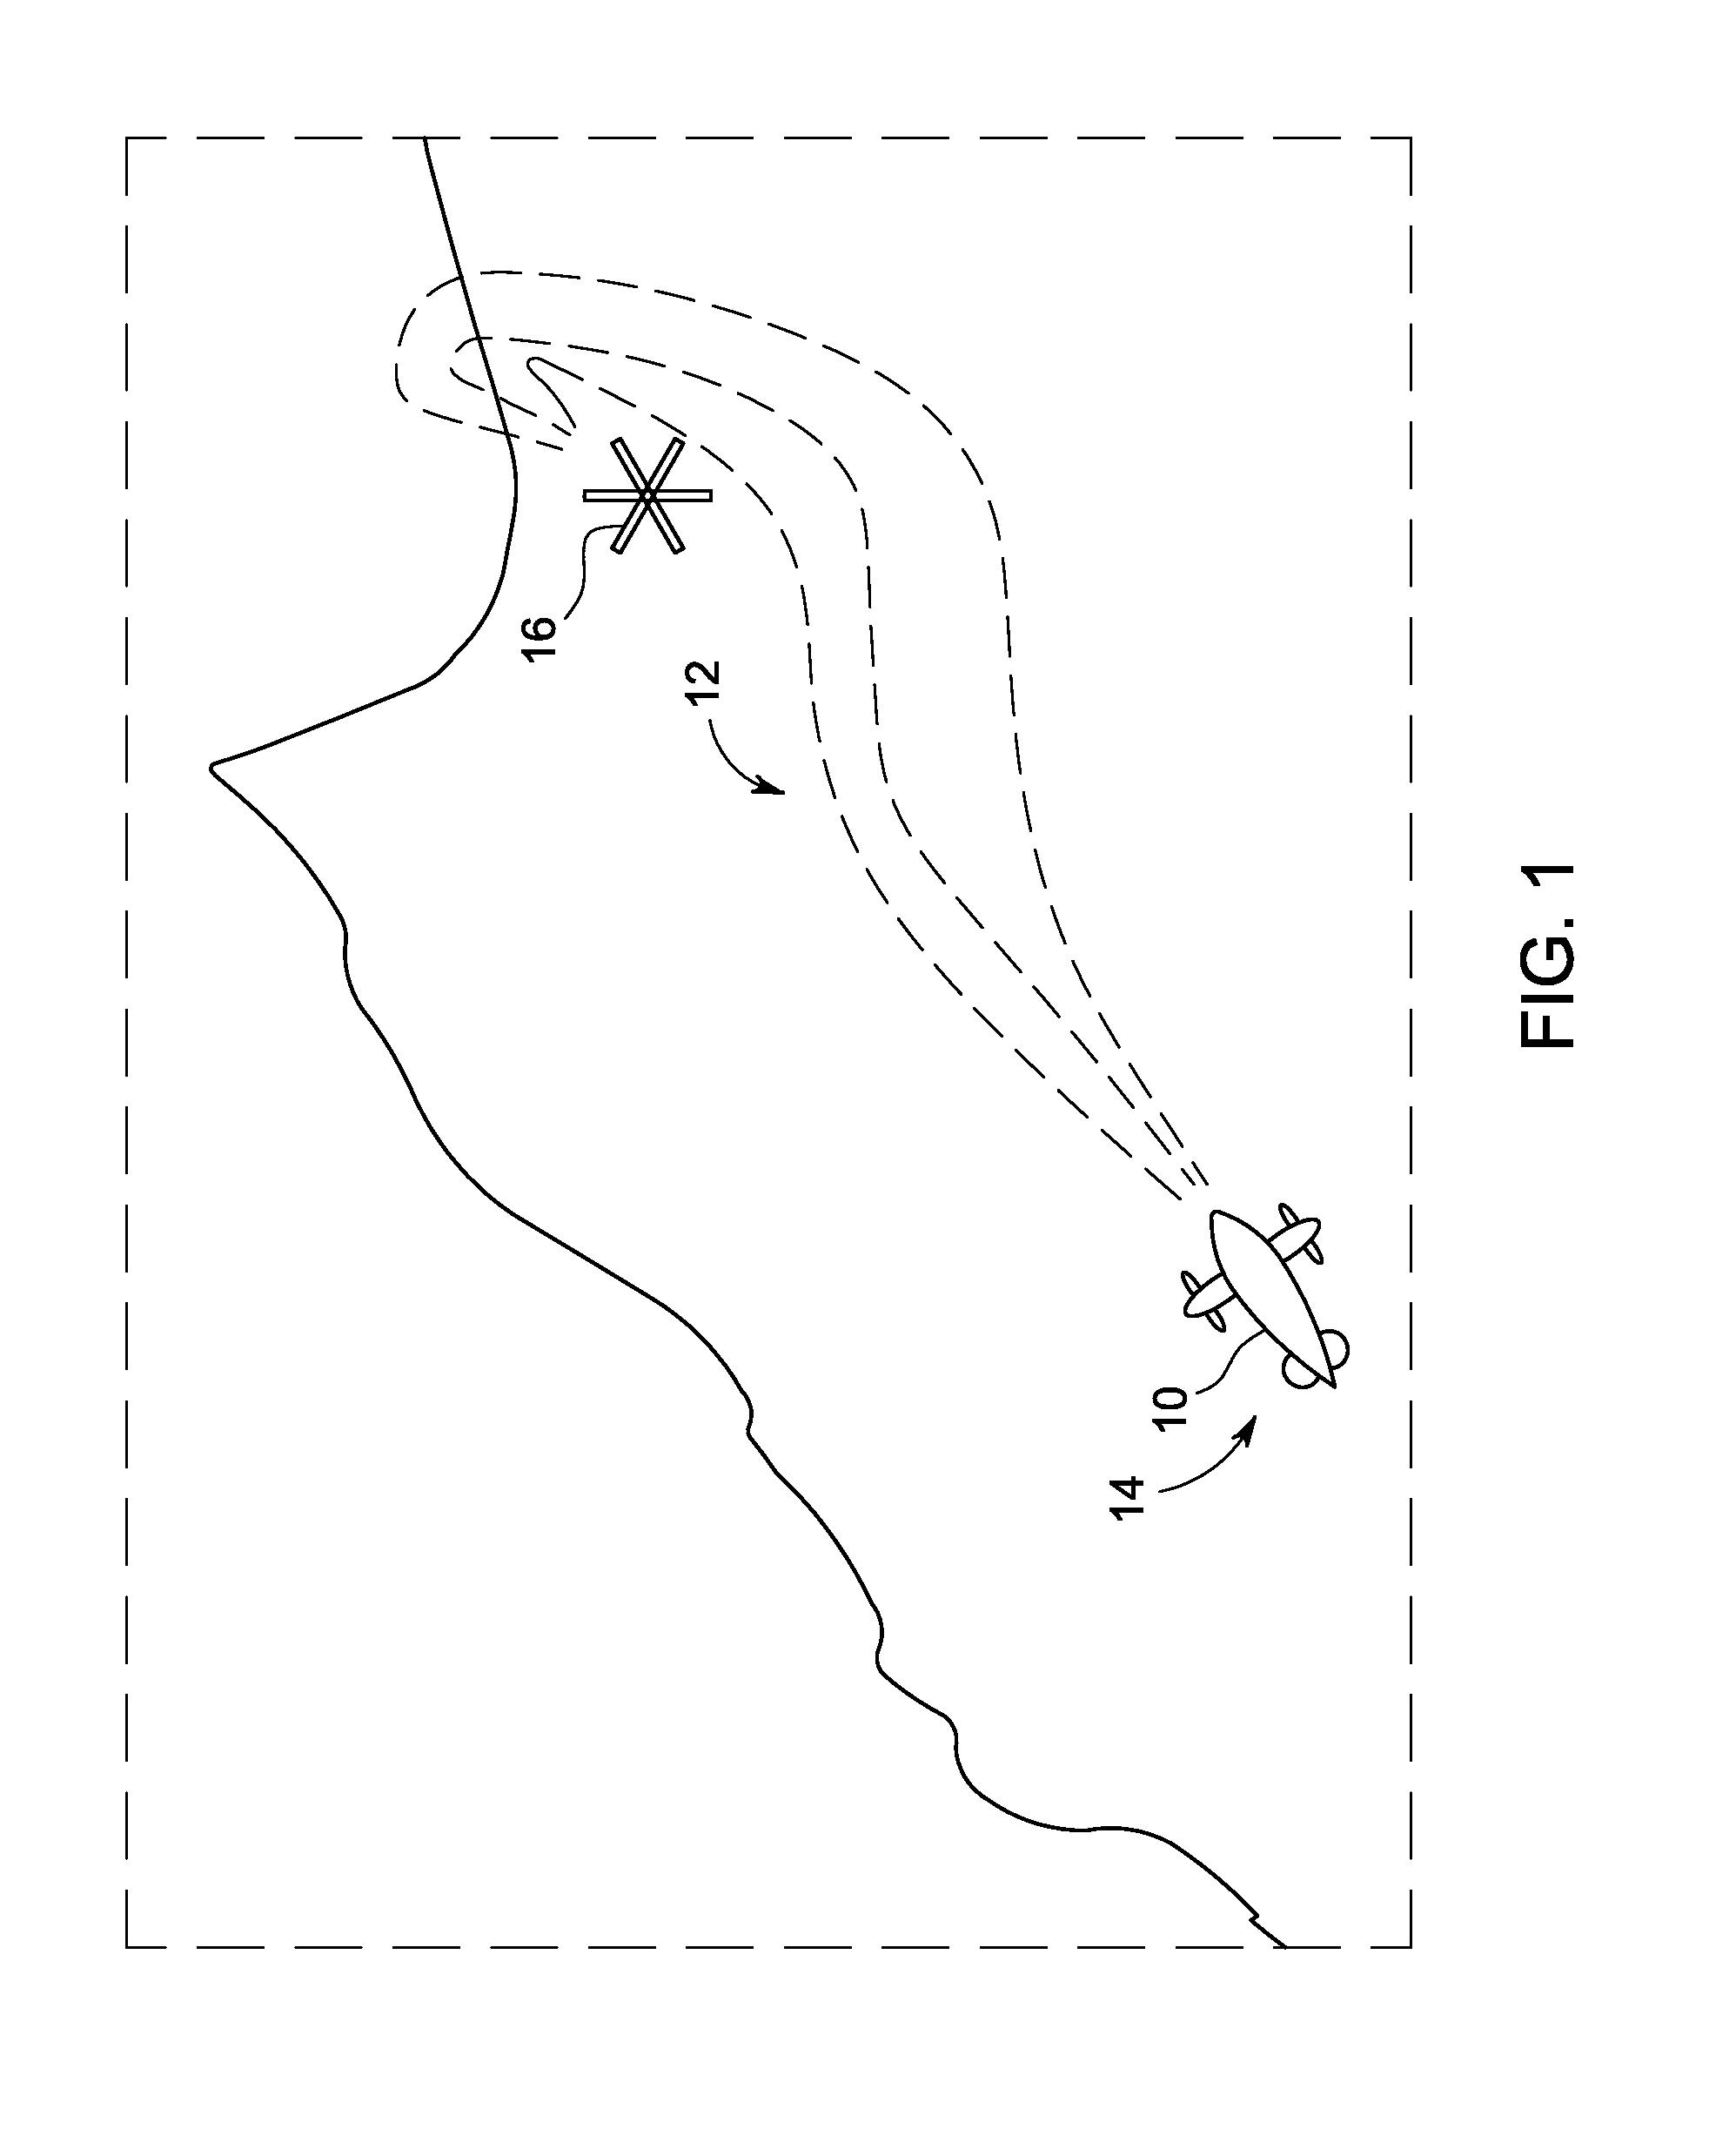 System and method for determining aircraft operational parameters and enhancing aircraft operation